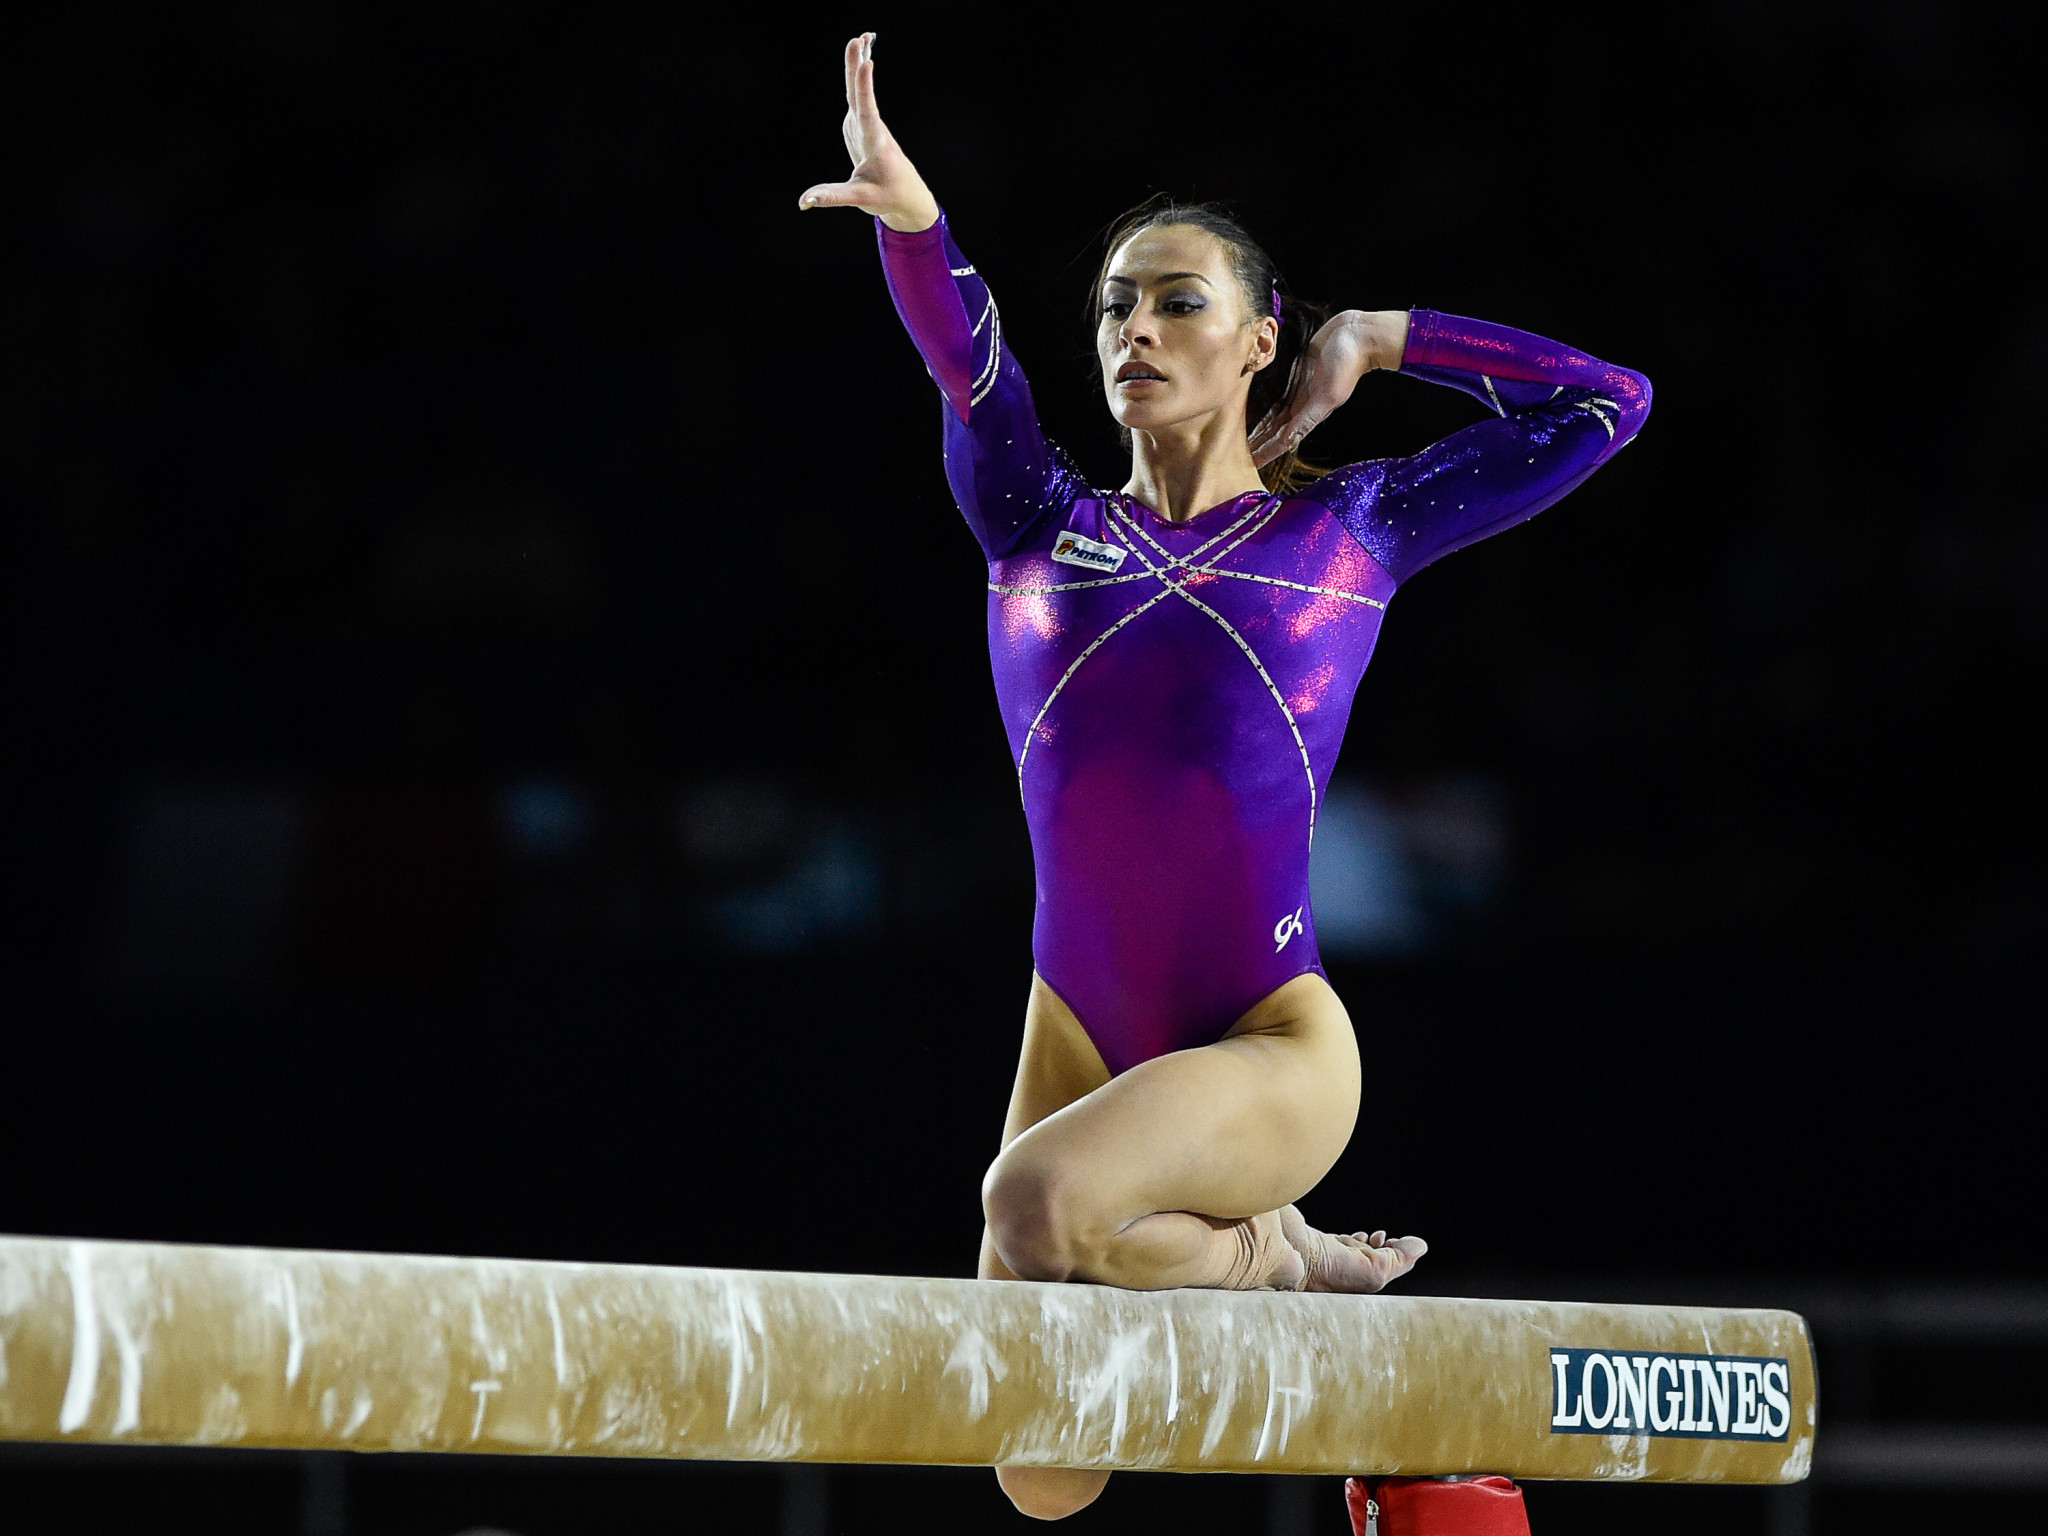 Romania's Catalina Ponor is an athlete representative for artistic gymnastics ©Getty Images